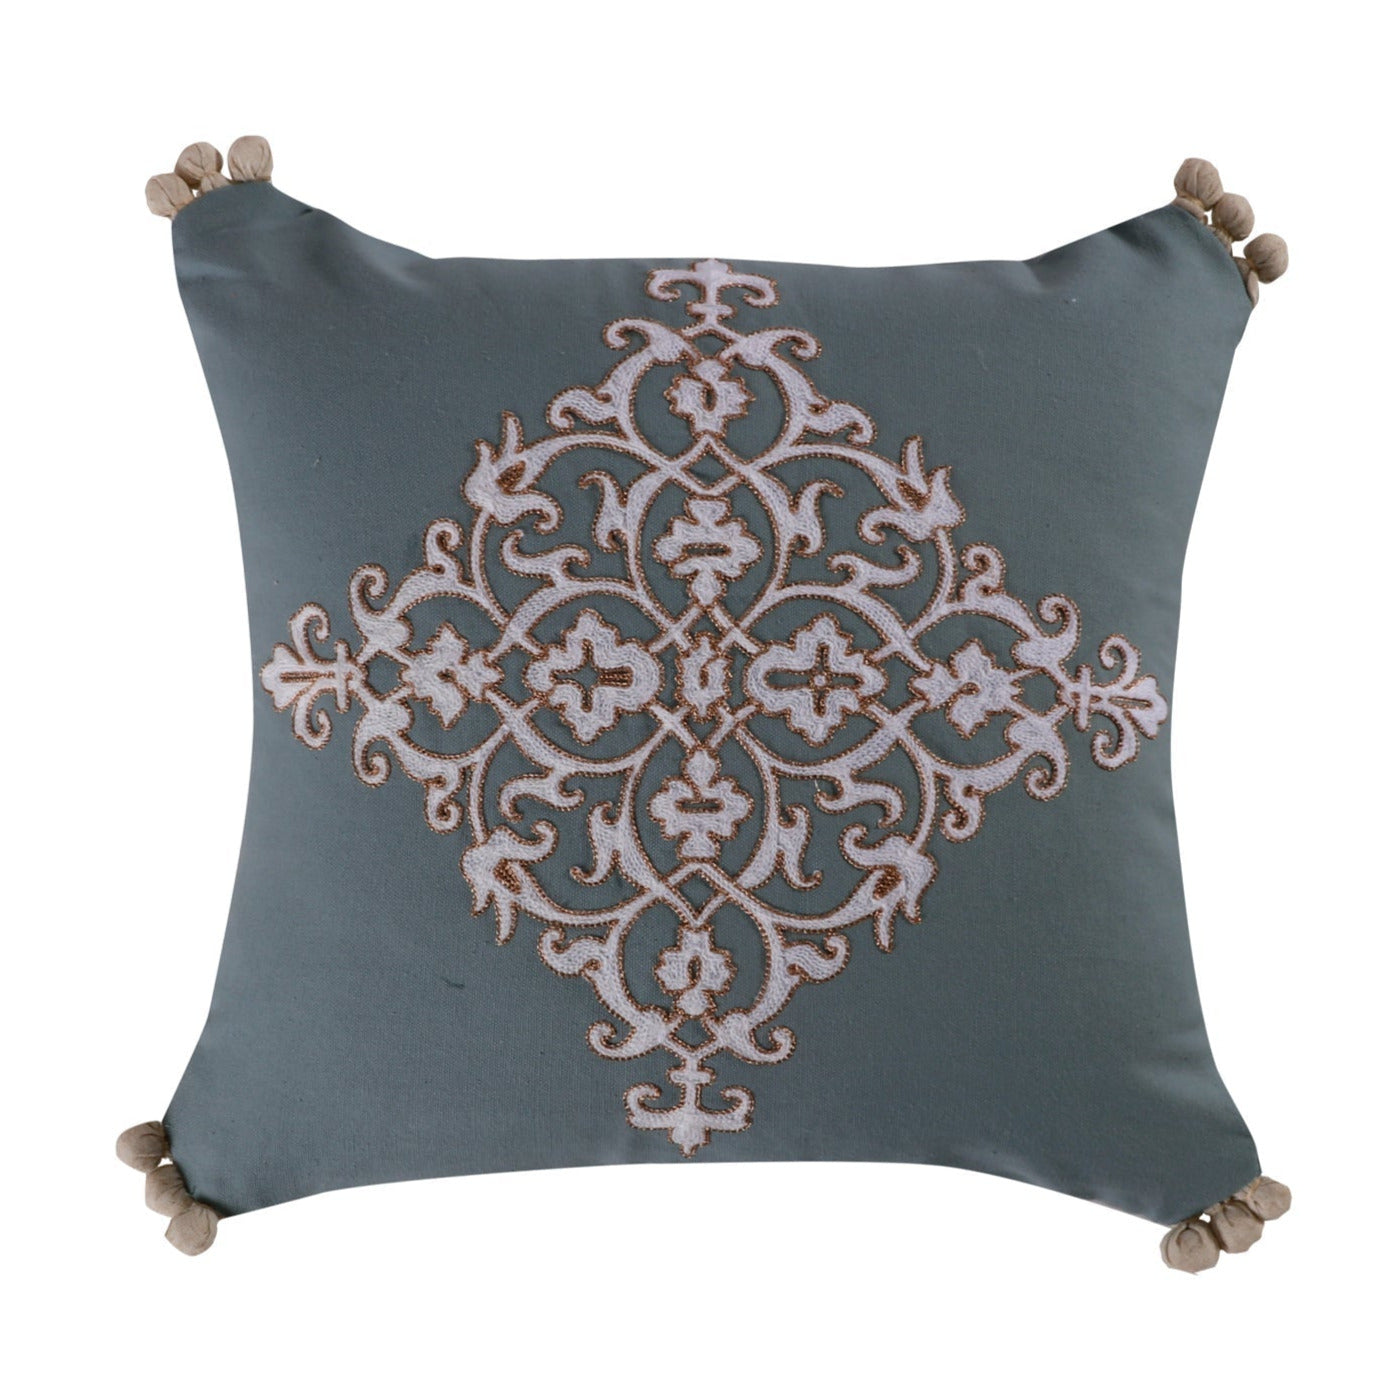 Marisol Embroidered Crewel Pompom Pillow